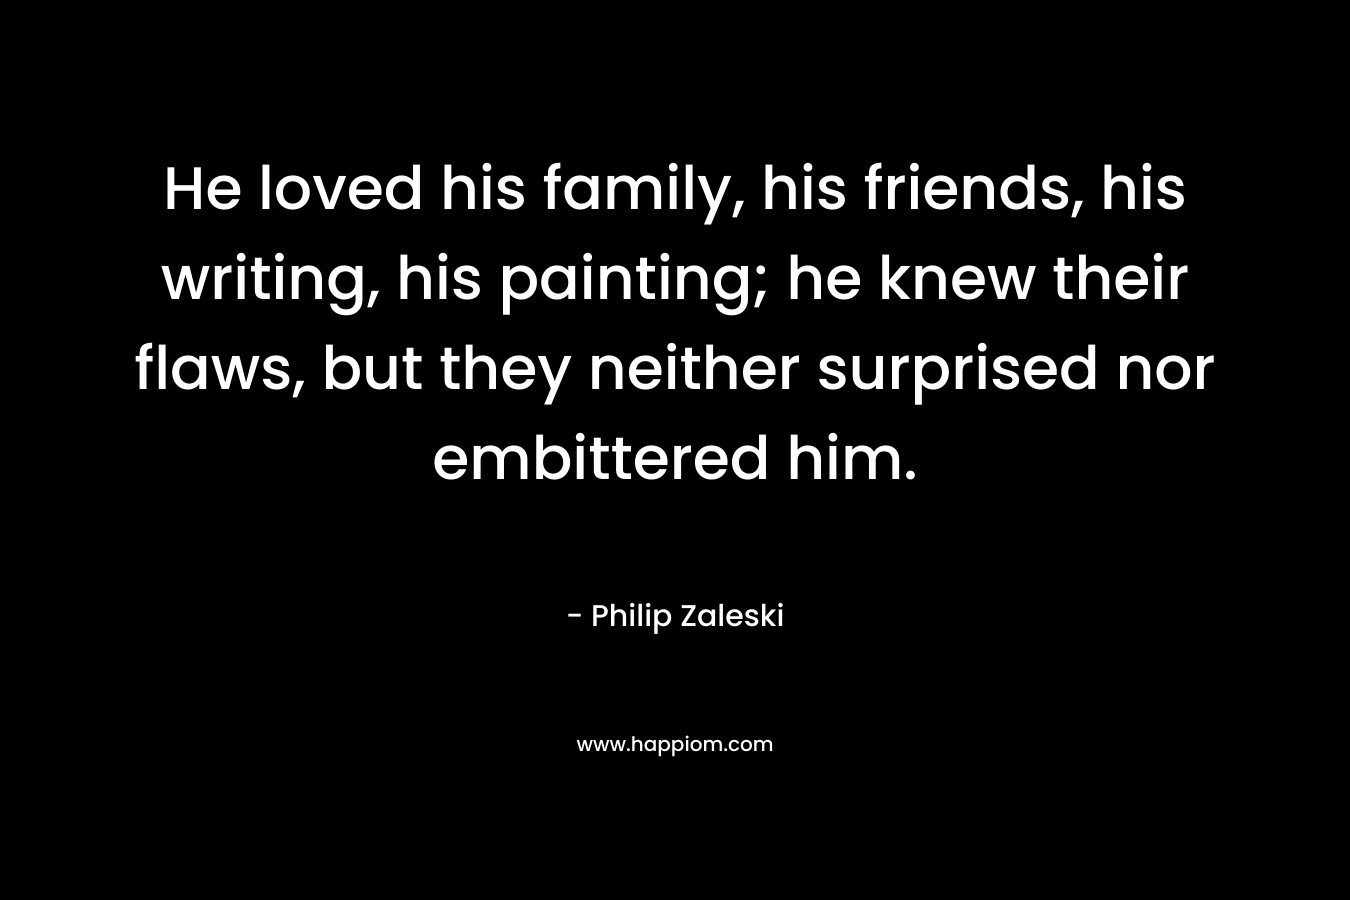 He loved his family, his friends, his writing, his painting; he knew their flaws, but they neither surprised nor embittered him. – Philip Zaleski